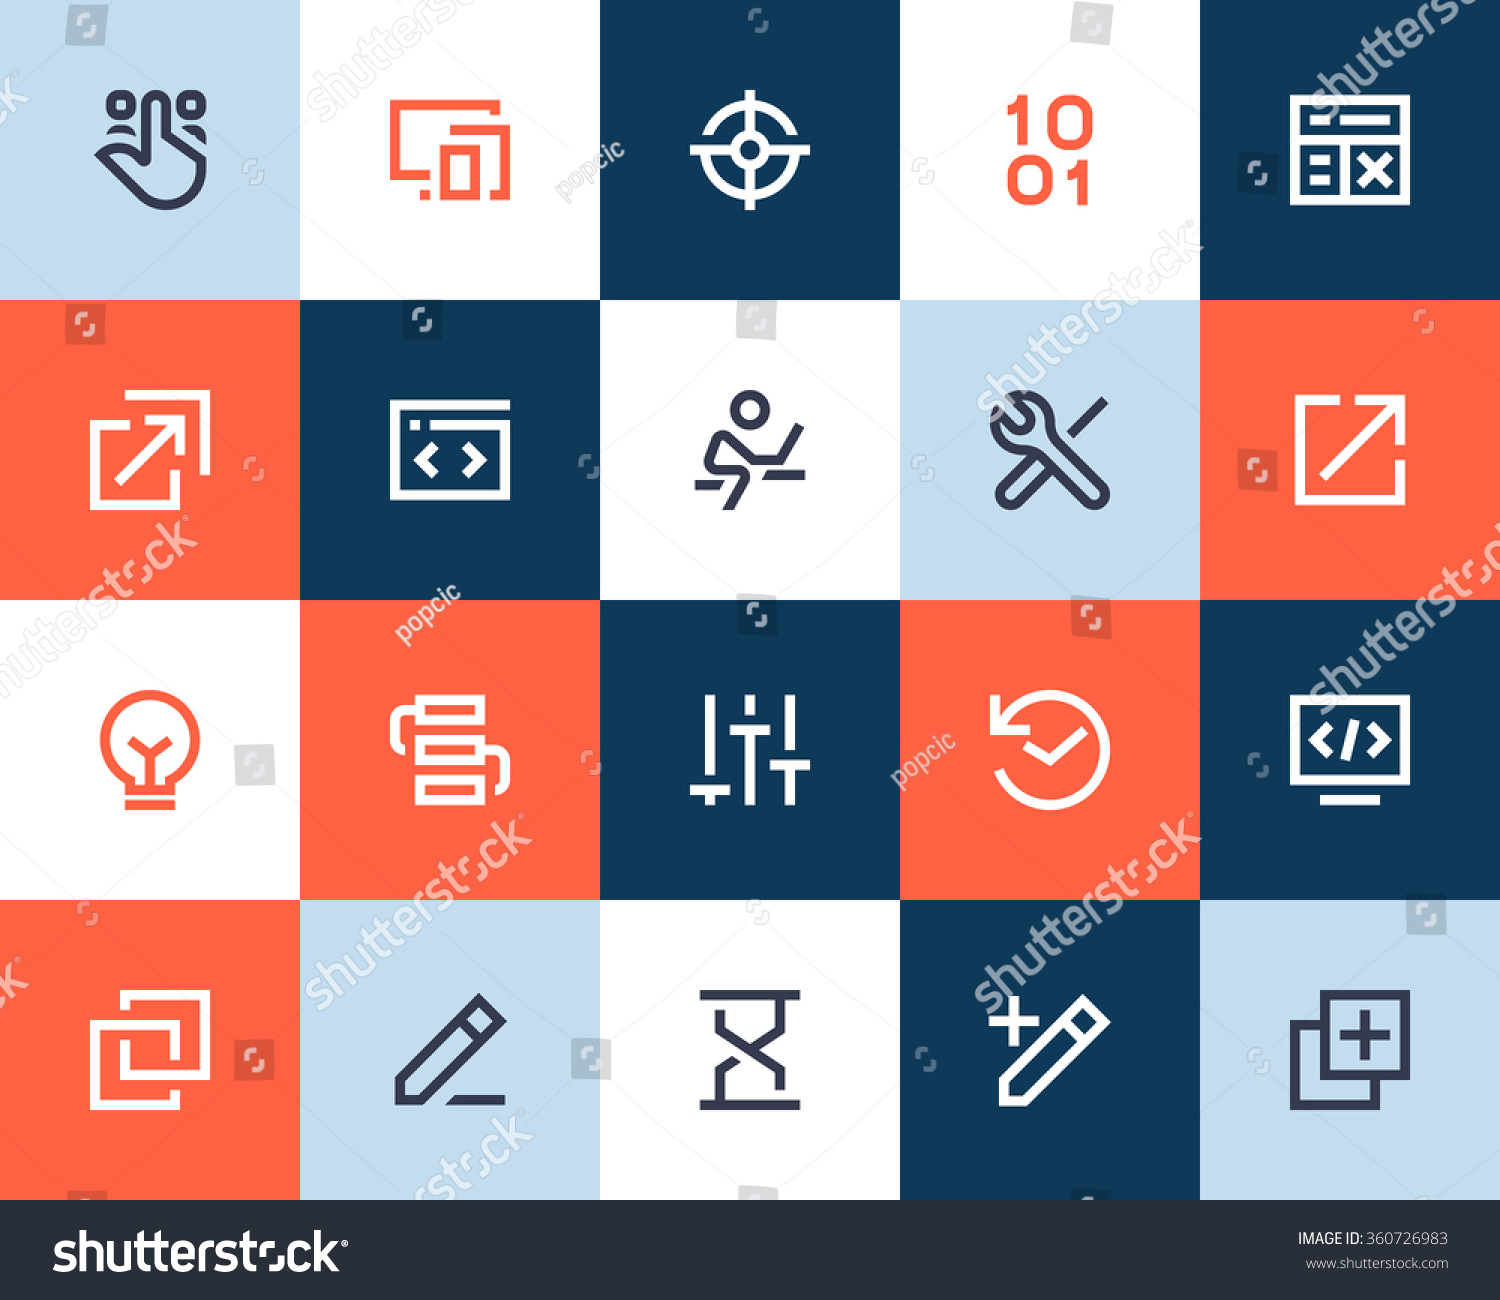  Programming  And Developer Icons  Flat  Style Stock Vector 